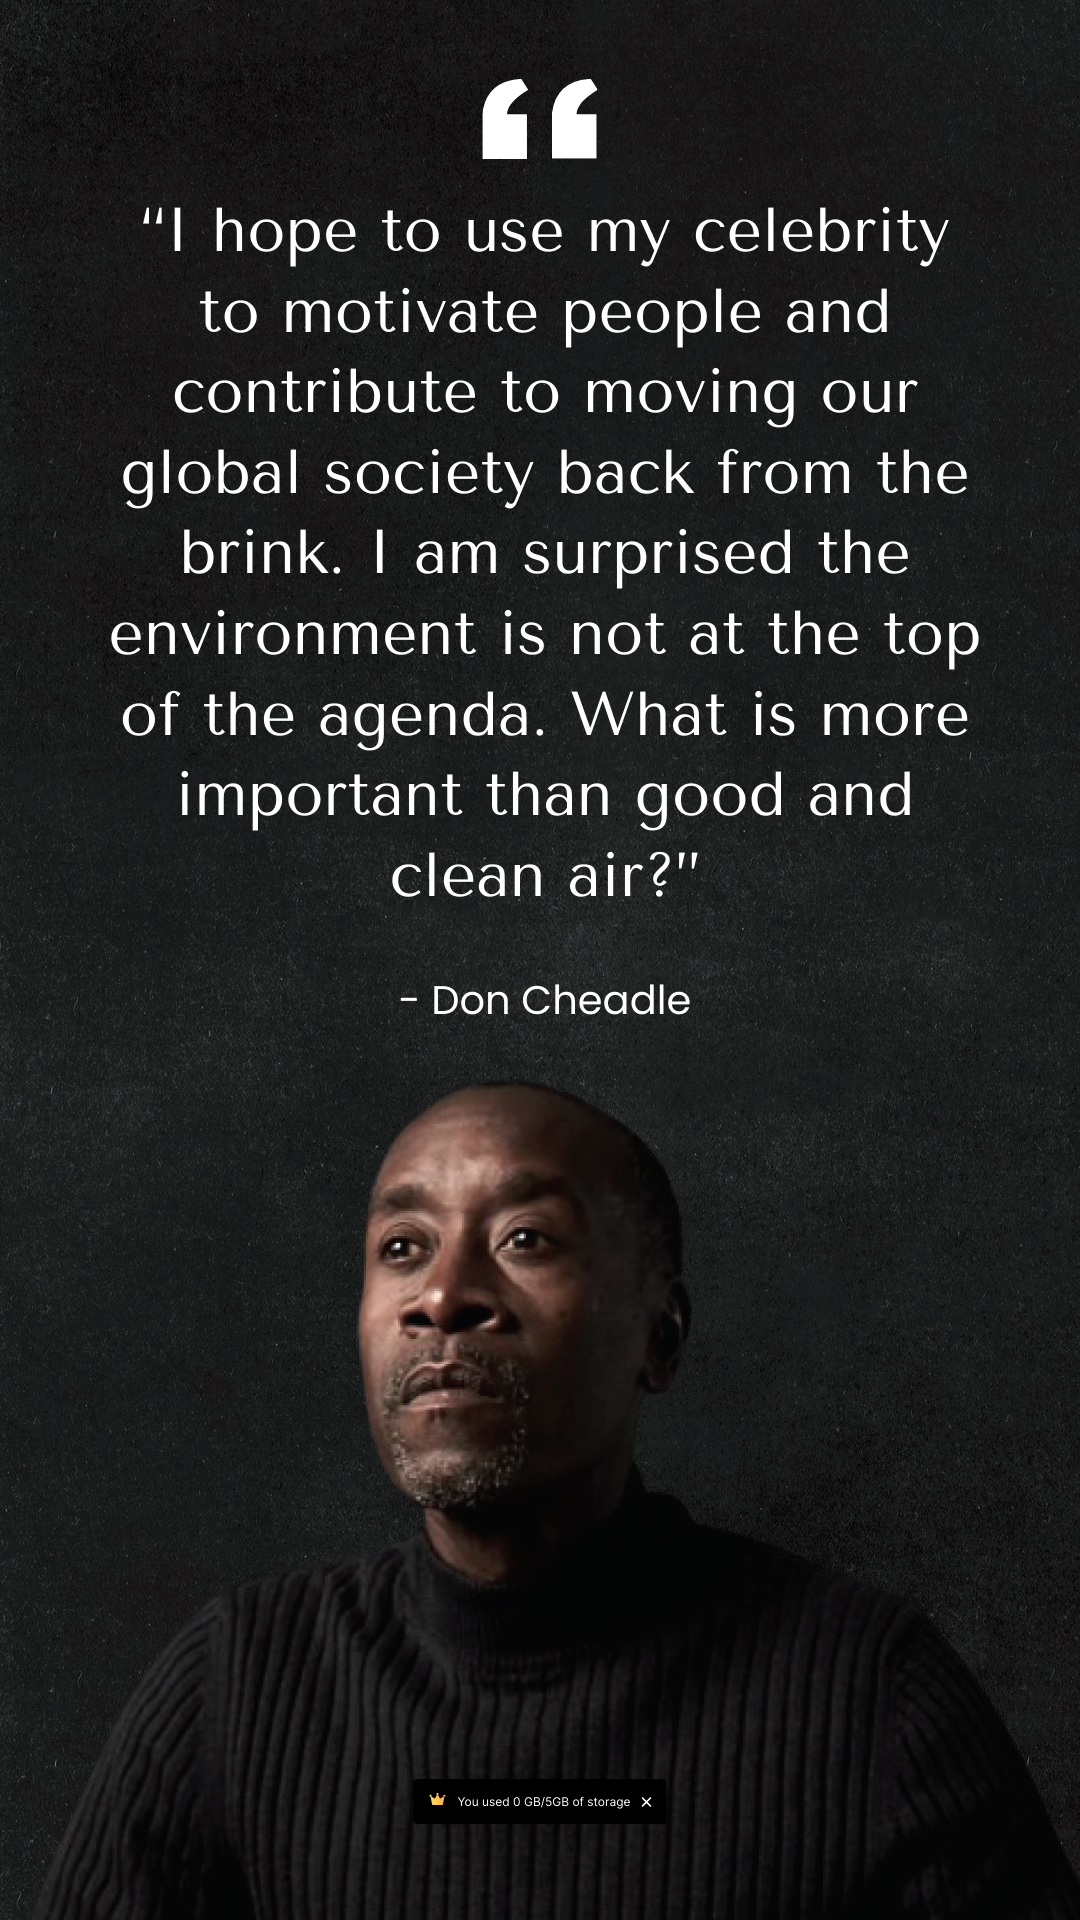 Global Warming Quote by Celebrities